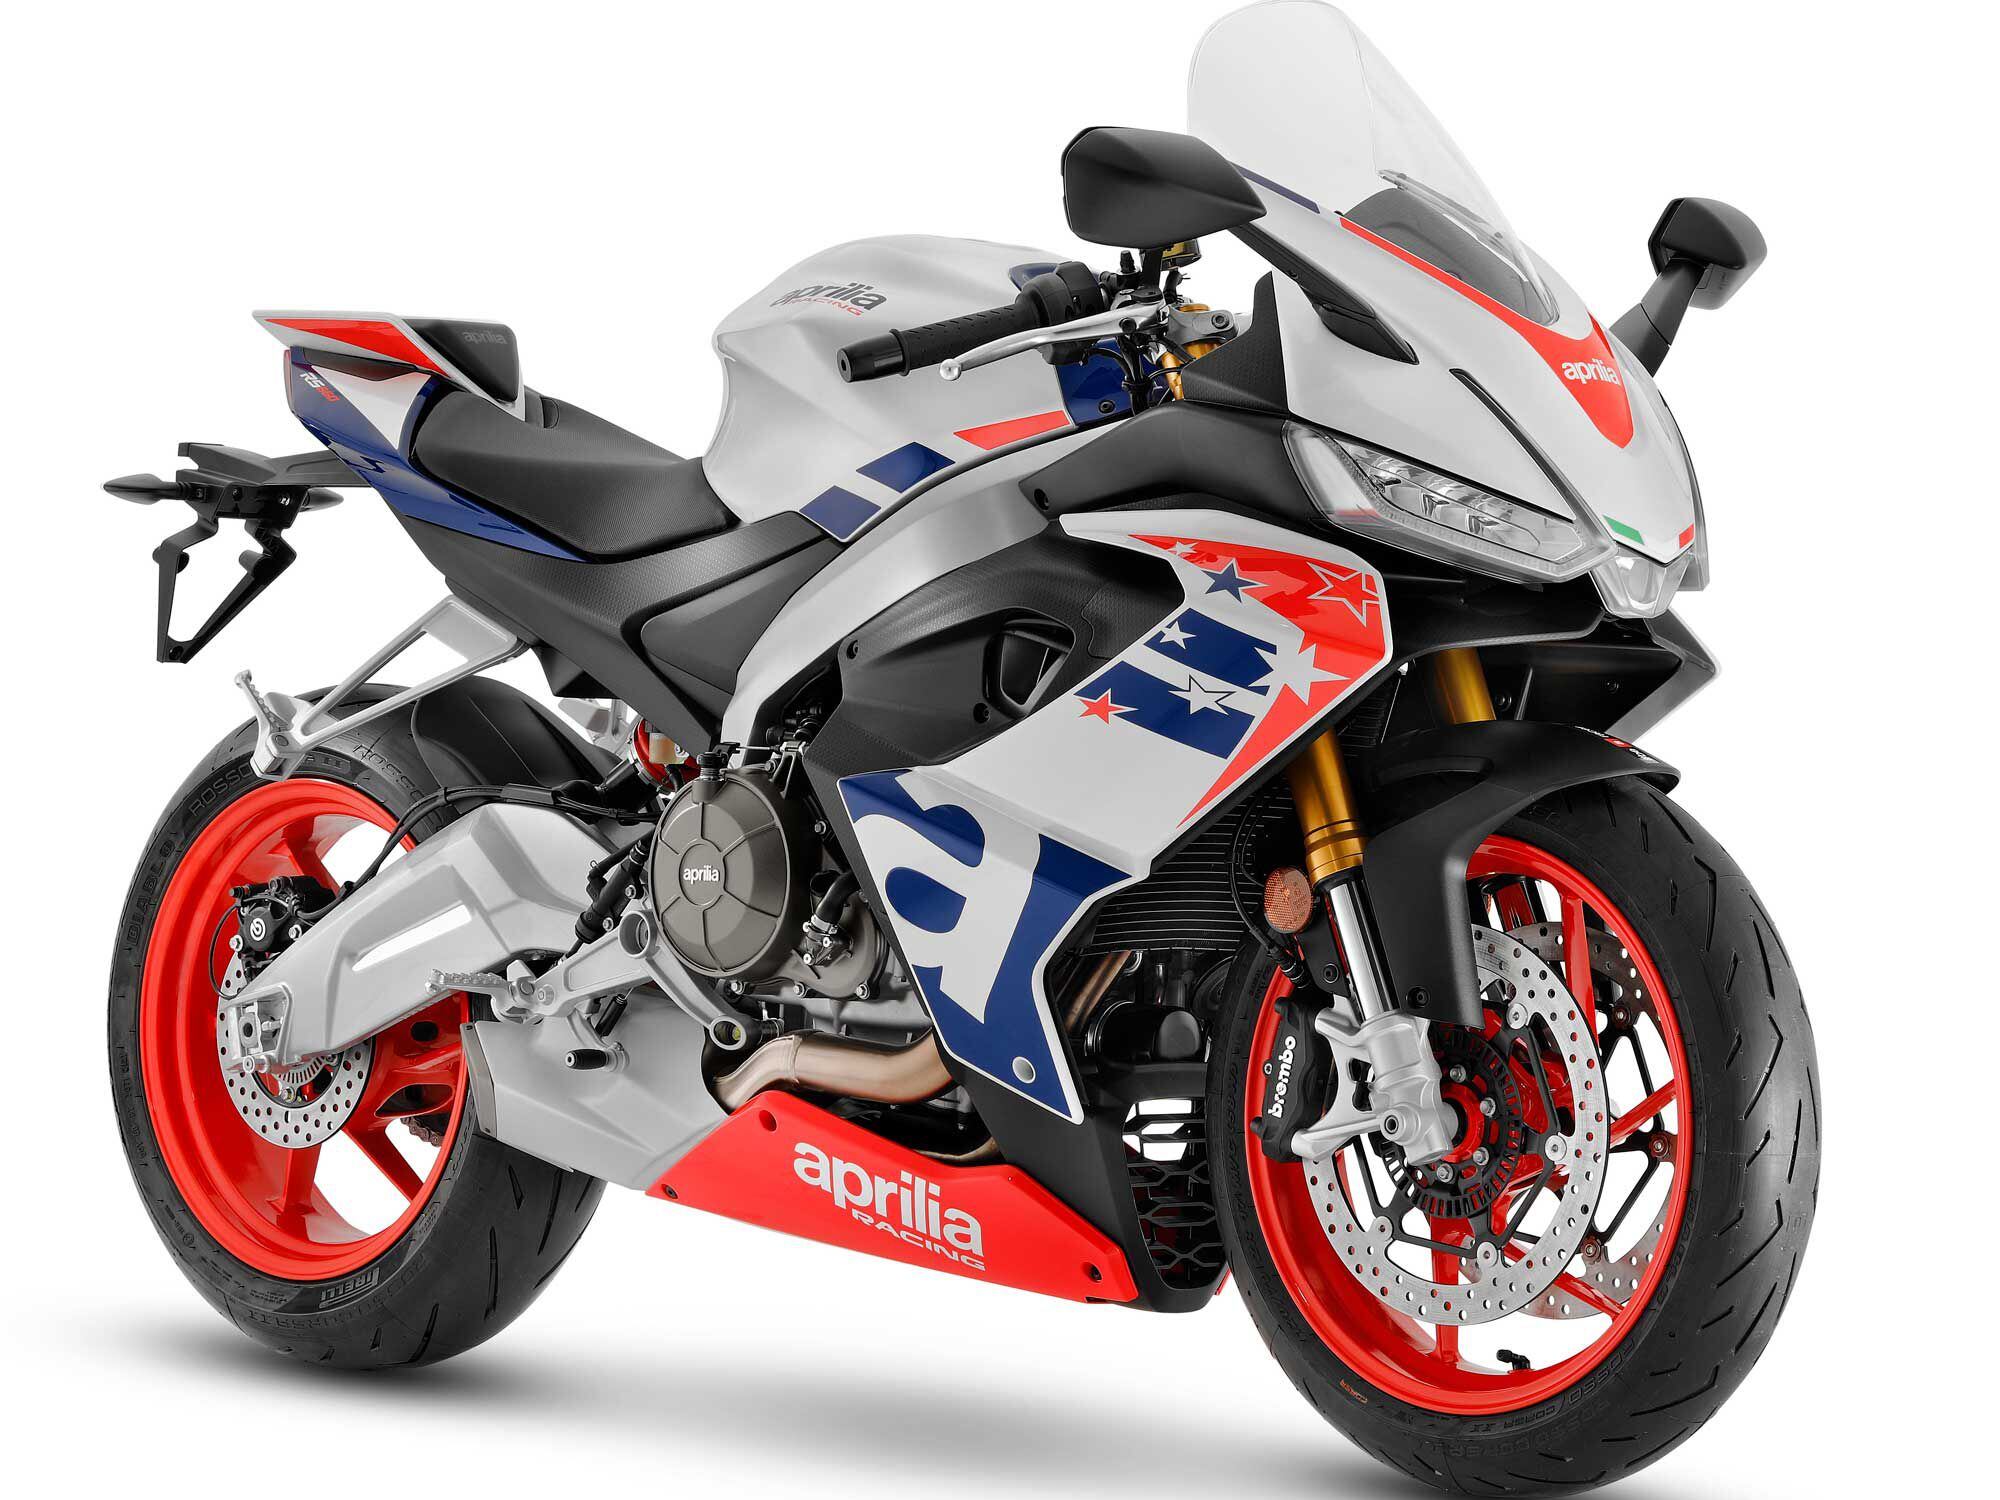 Pricing and availability have not been announced for the 2022 Aprilia RS 660 Limited Edition that celebrates the model’s MotoAmerica championship.